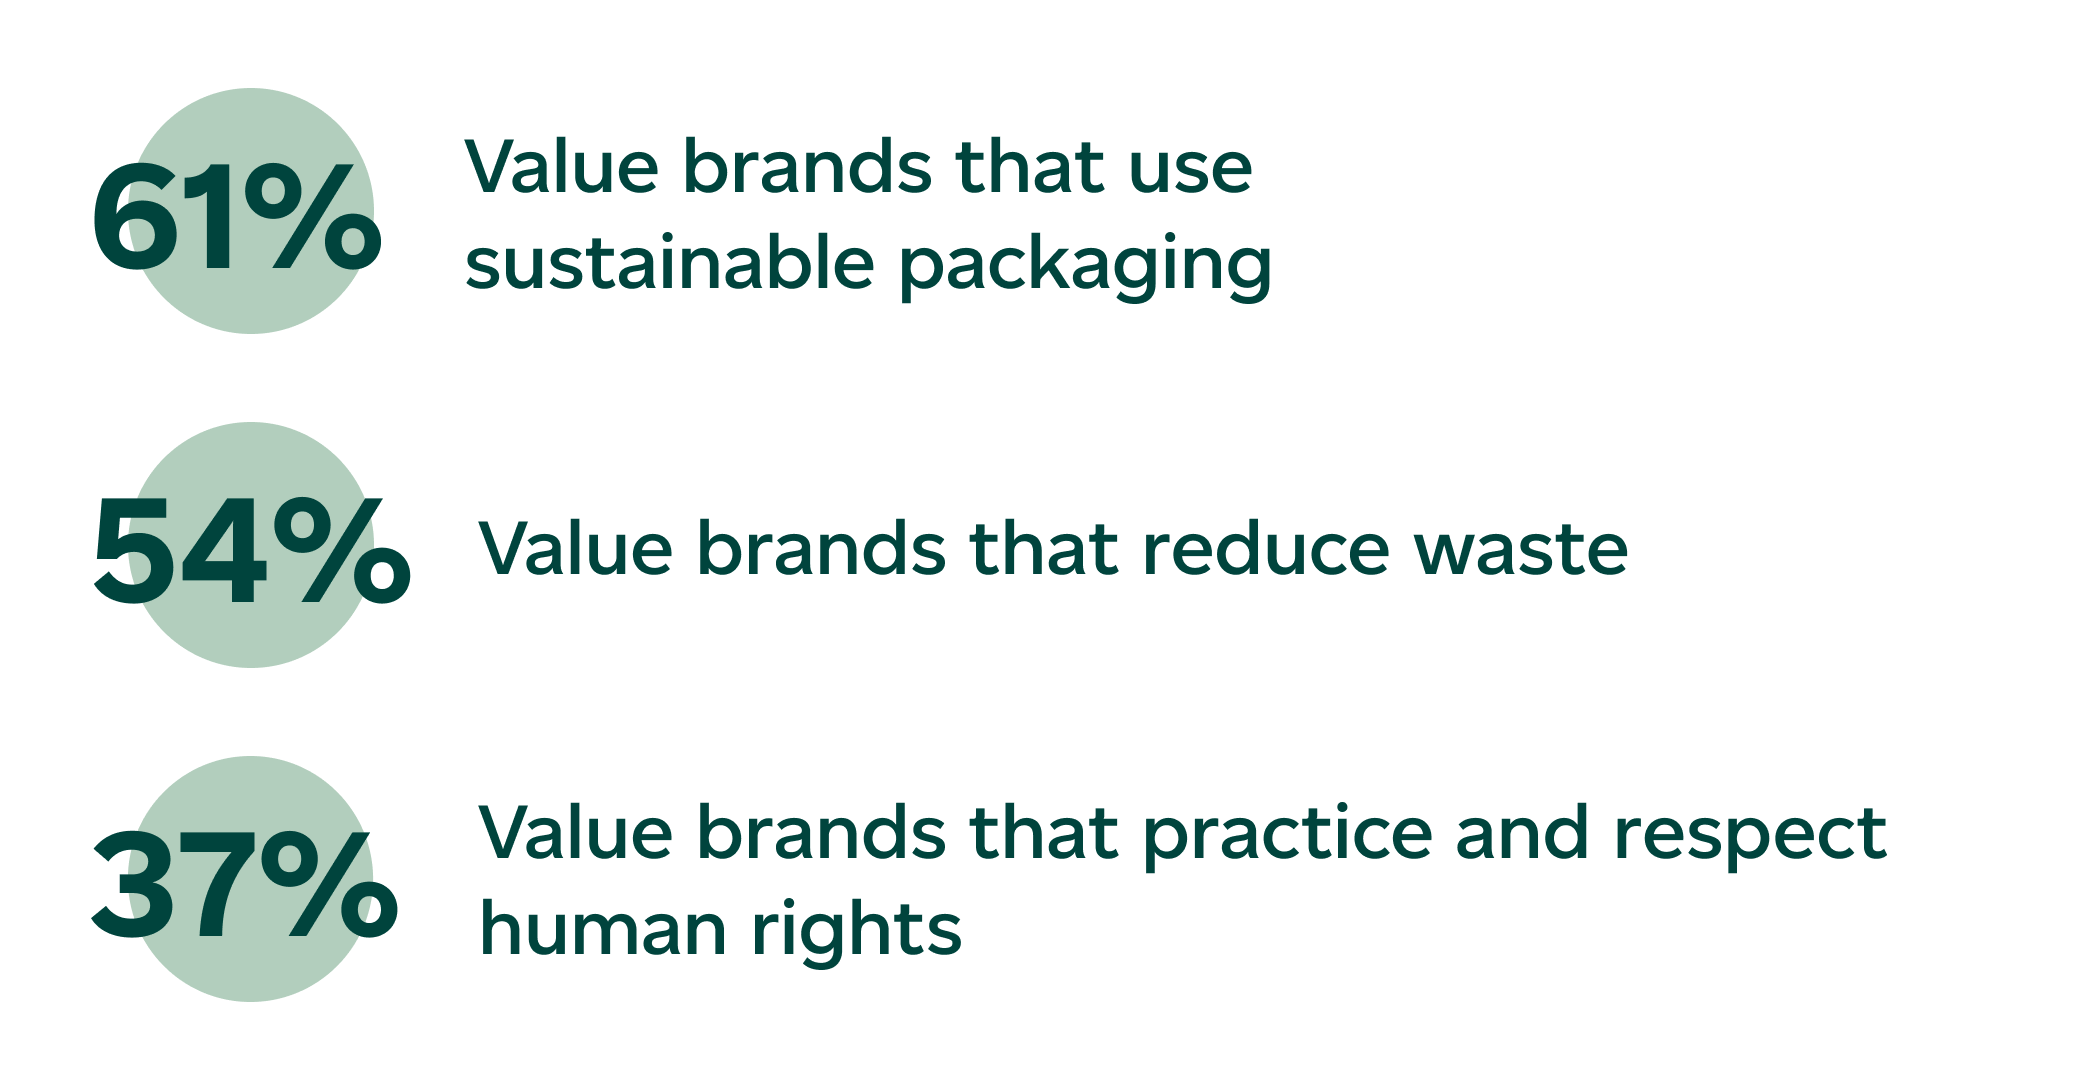 61% value brands that use sustainable packaging. 54% value brands that reduce waste. 37% value brands that practice and practice and respect human rights.